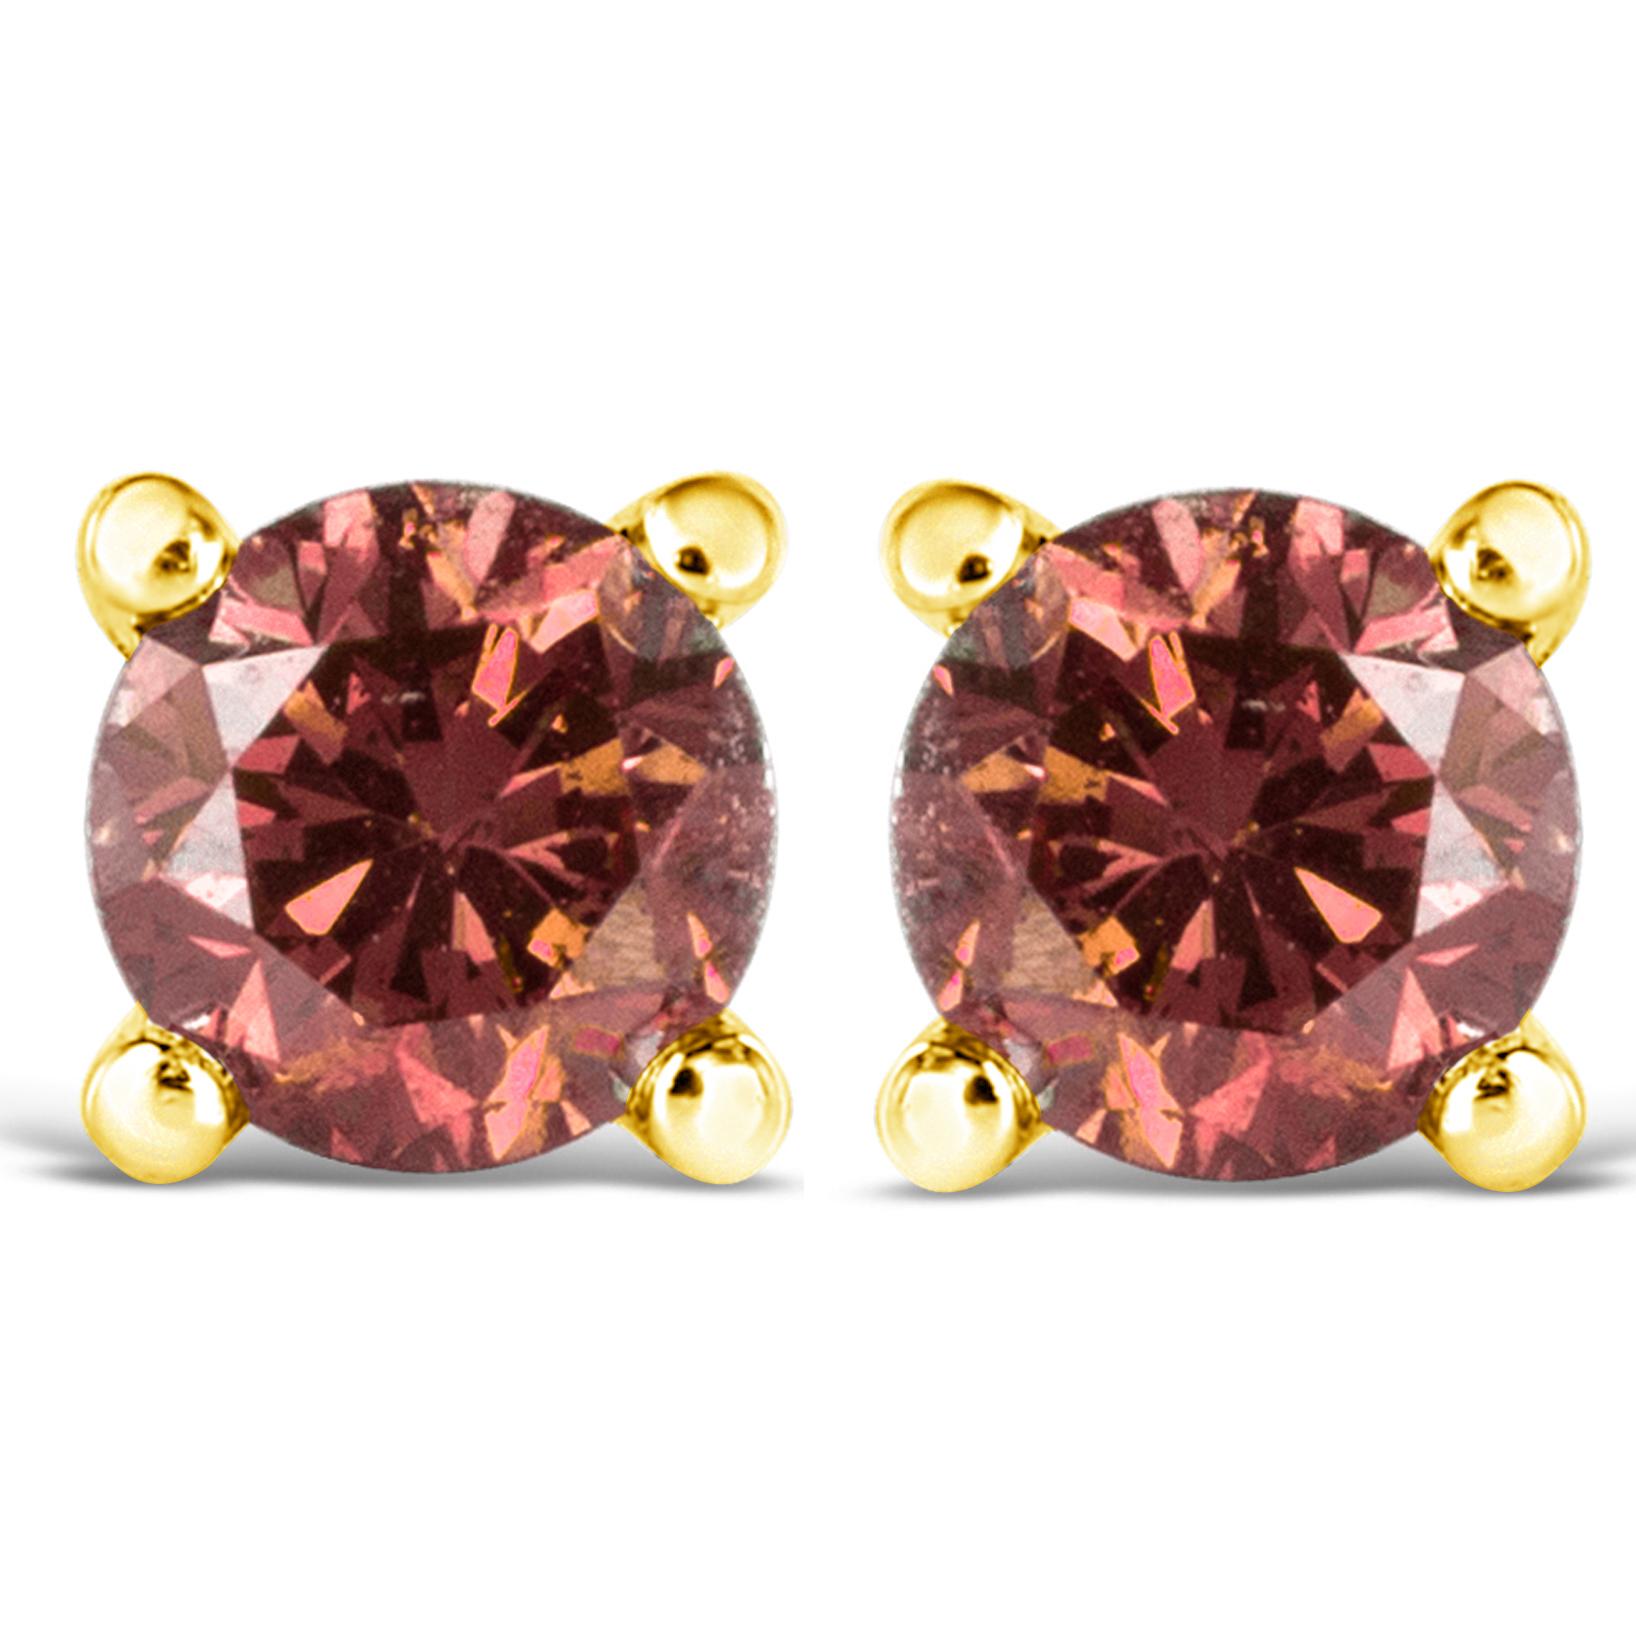 Celebrate any occasion with these classic shimmering solitaire diamond stud earrings. Fashioned in genuine 14k Yellow Gold, each earring showcases a sparkling color treated round cut diamond solitaire. The 2 round, color treated diamonds radiate a